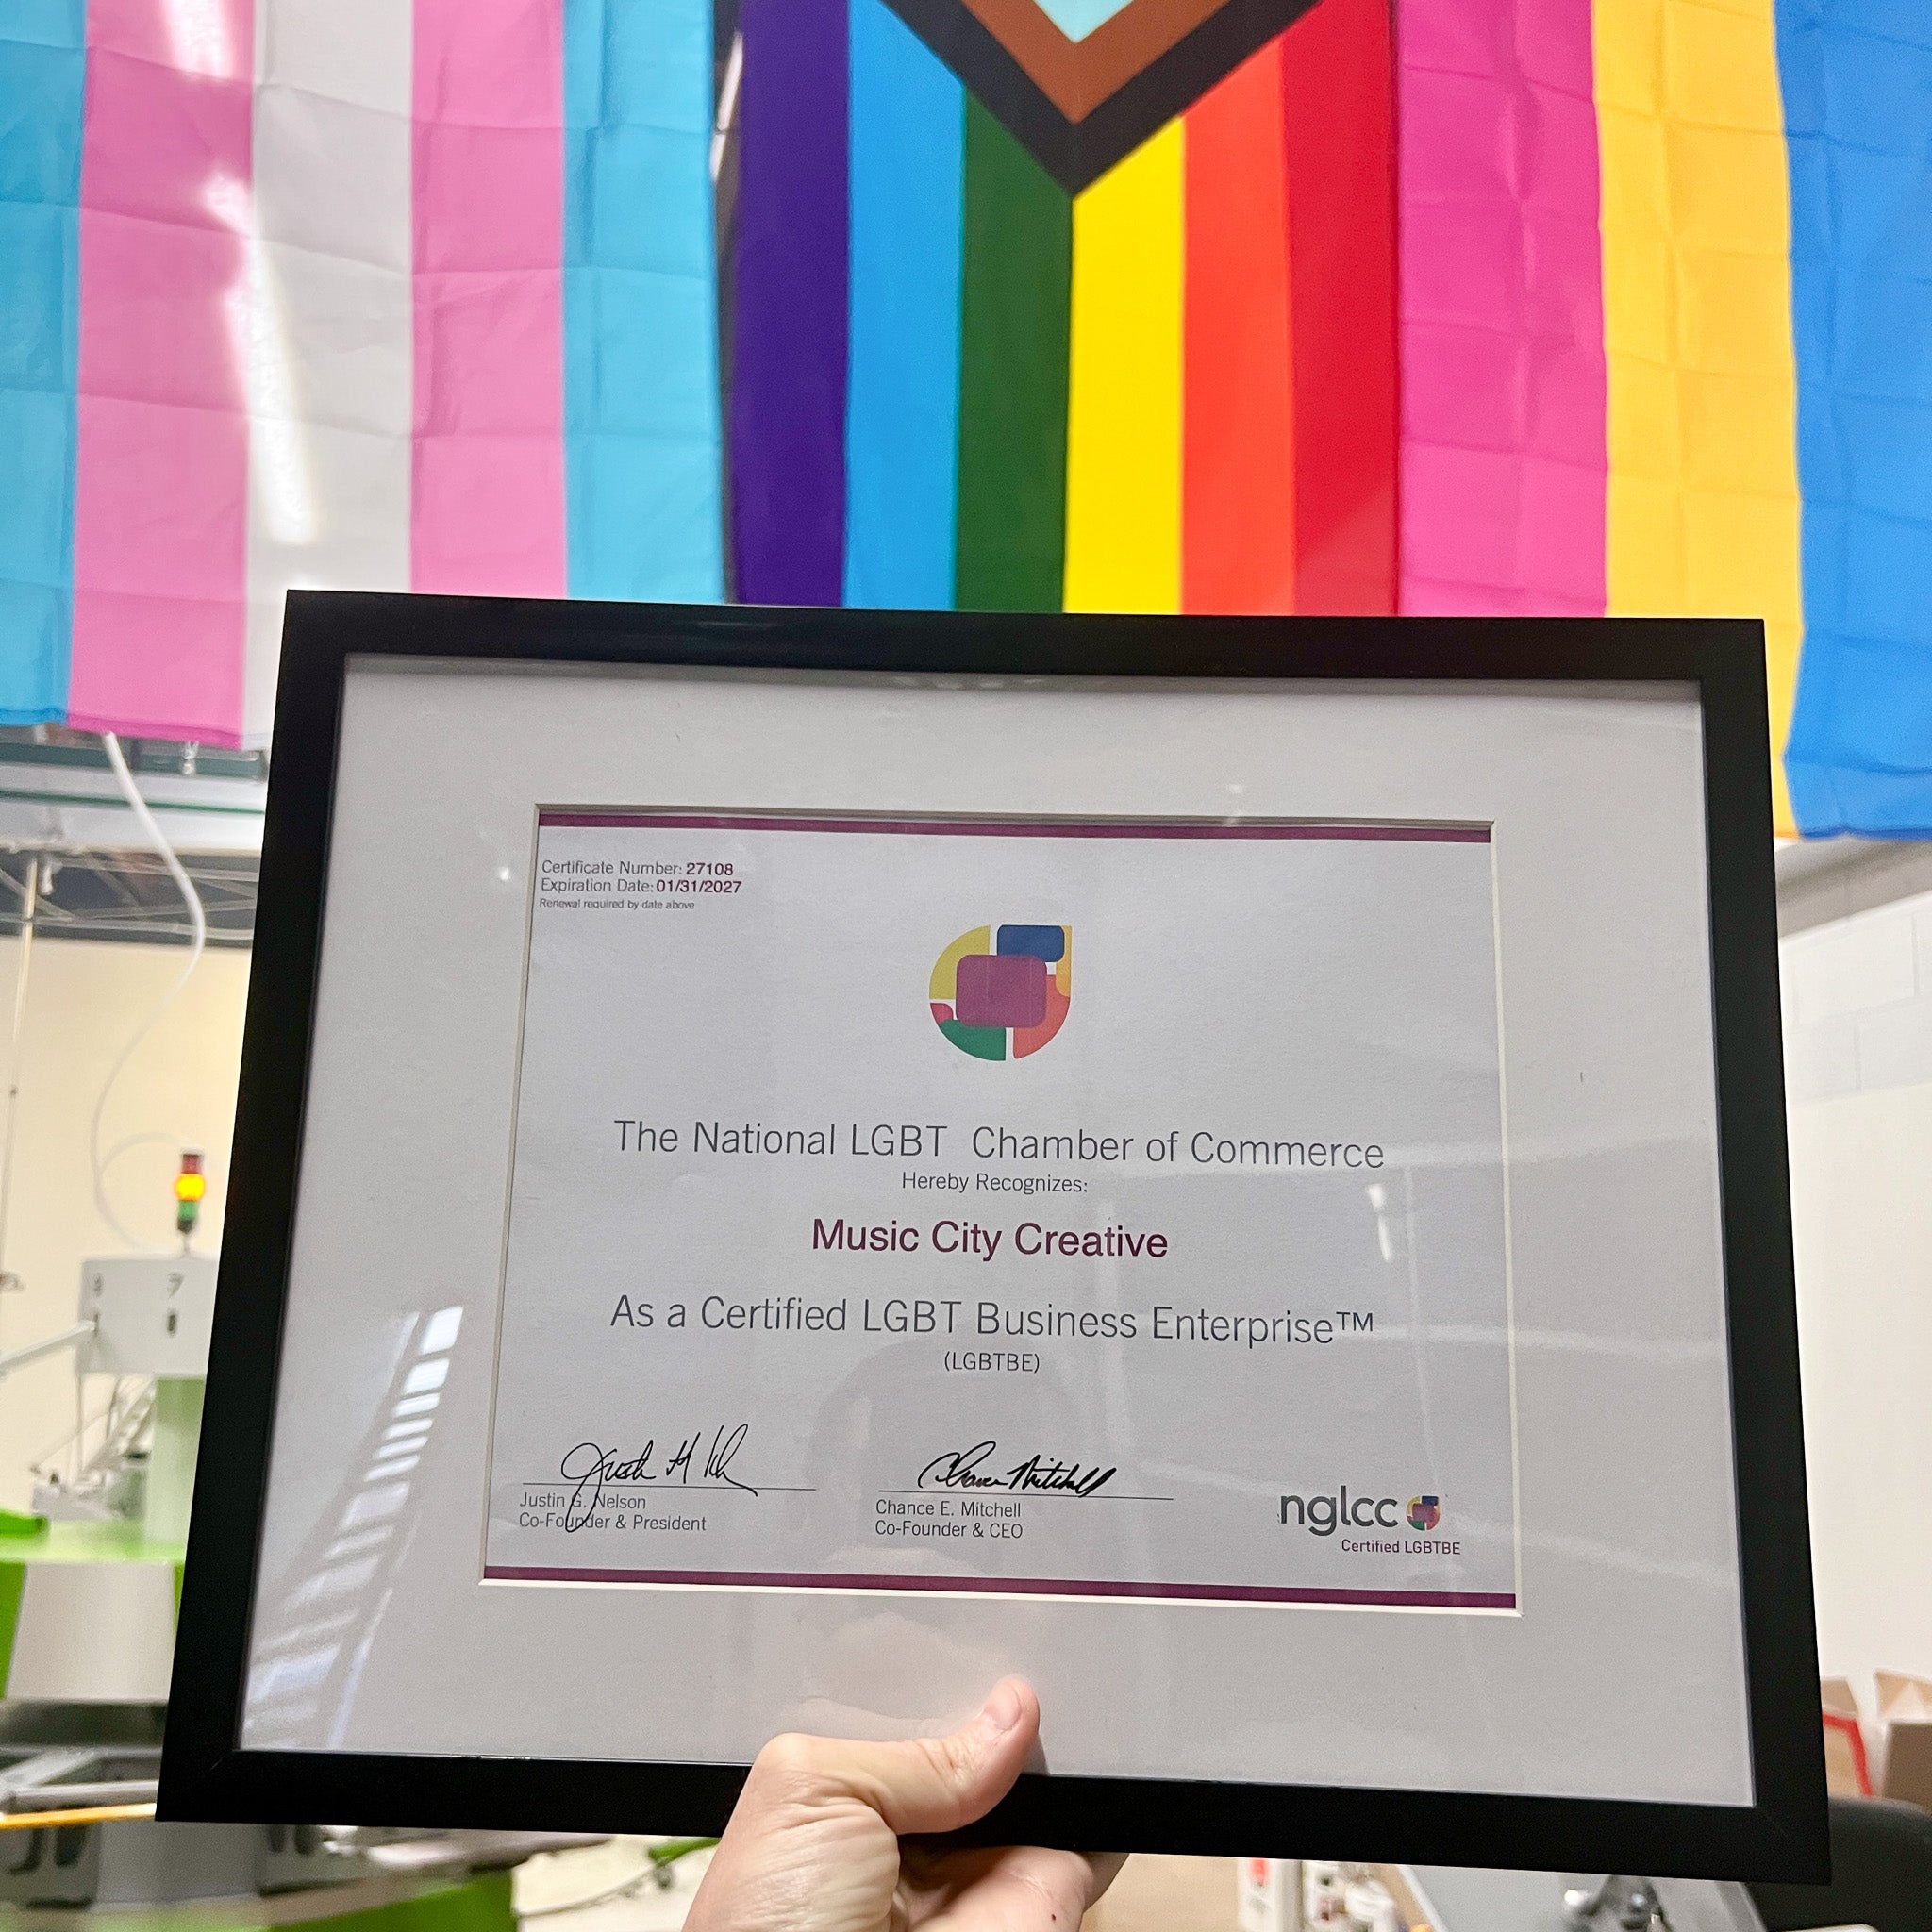 Music City Creative Officially Certified as LGBT Business Enterprise (LGBTBE®) By National LGBT Chamber of Commerce